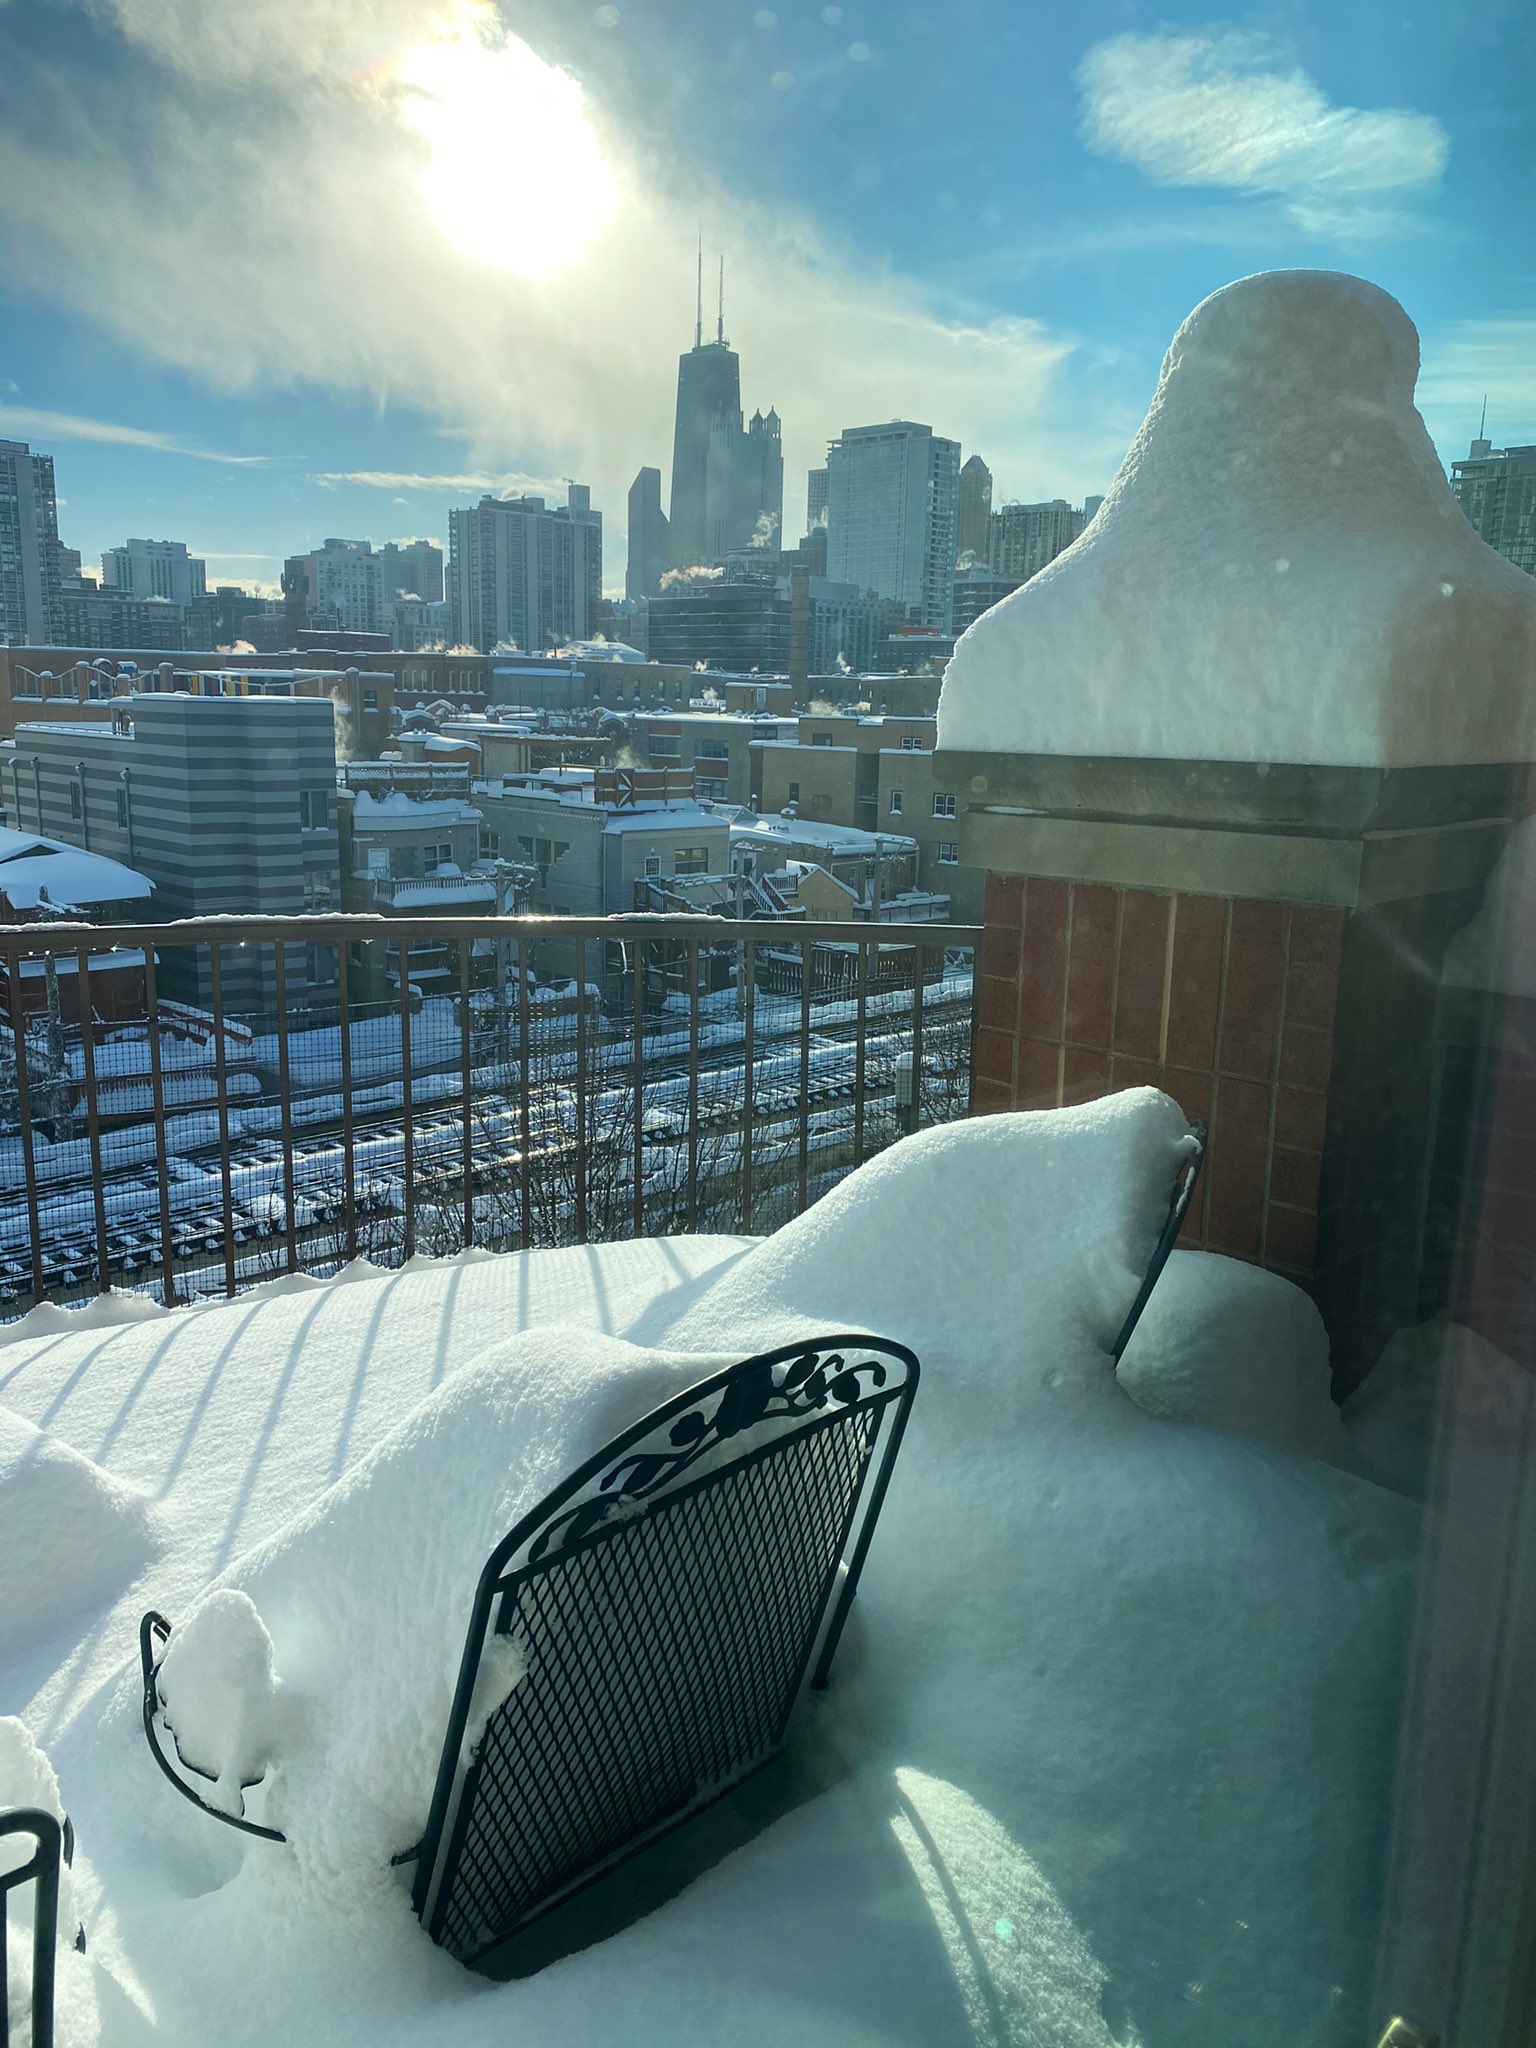 PHOTOS Chicago Is A Winter Wonderland After 18 Inches Of Snow Falls On